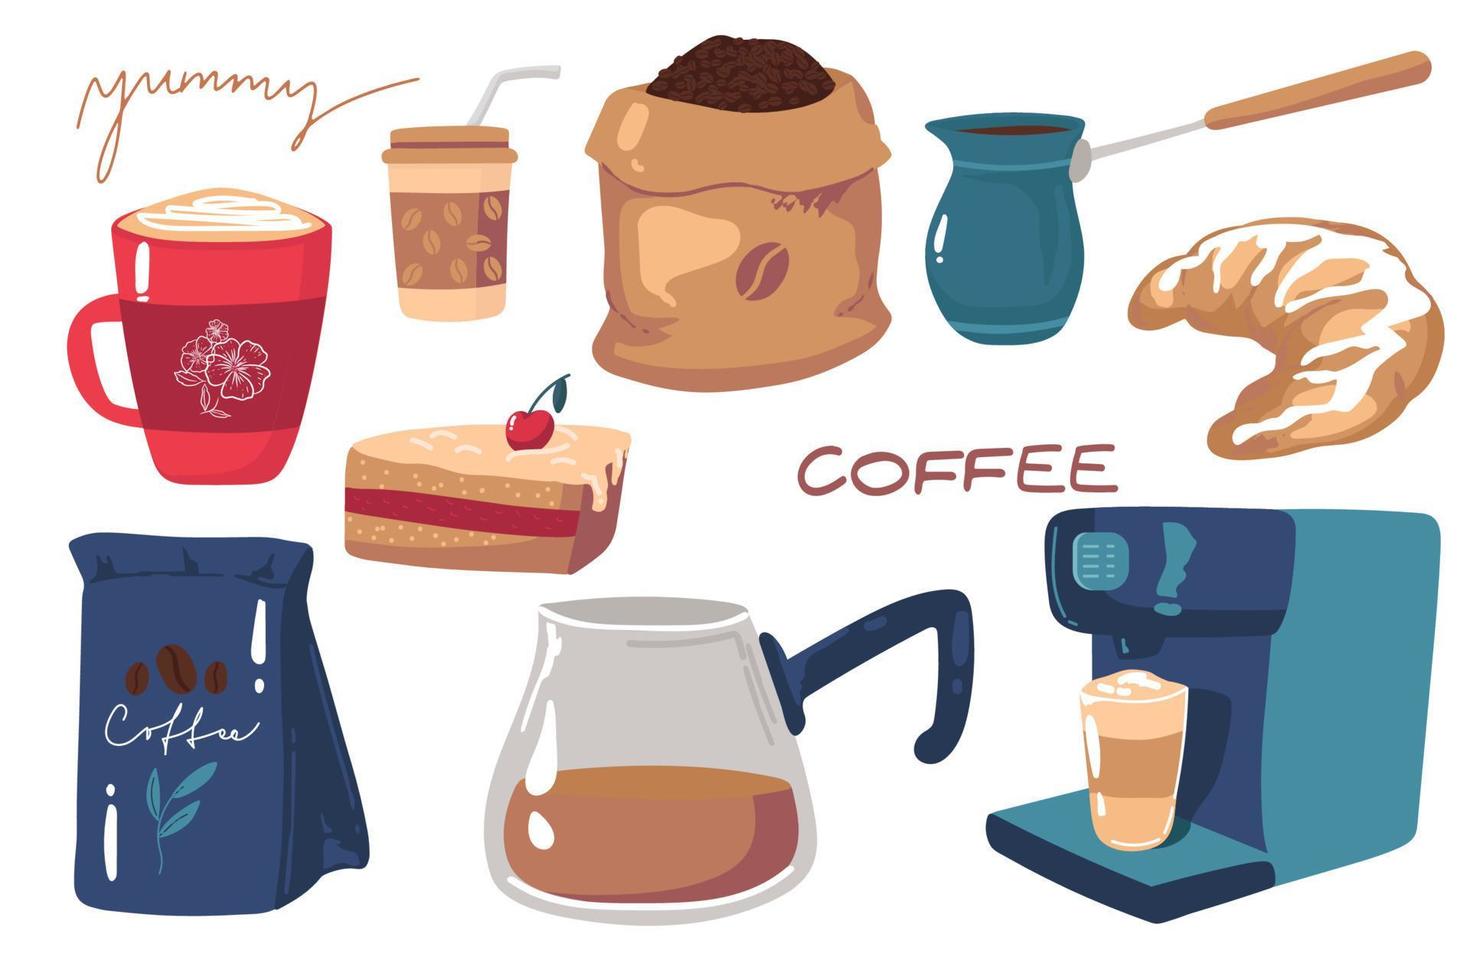 Big set of icons in flat style. Stylish coffee set of icons. Coffee, coffee drinks, coffee pots, and other vector